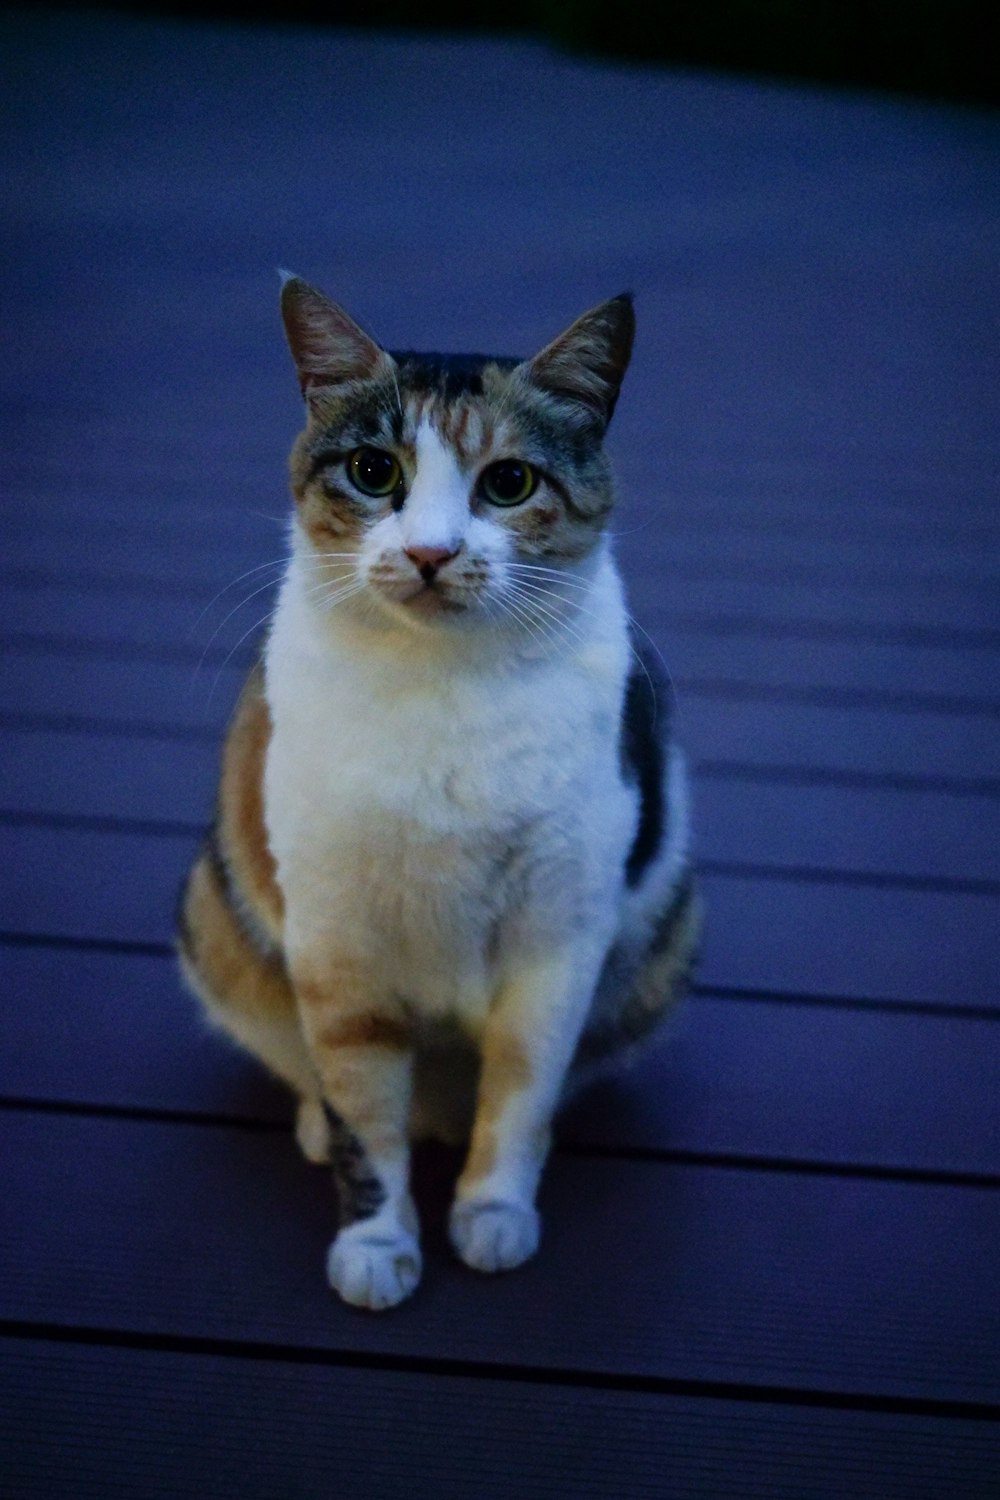 a cat sitting on a wooden floor looking at the camera